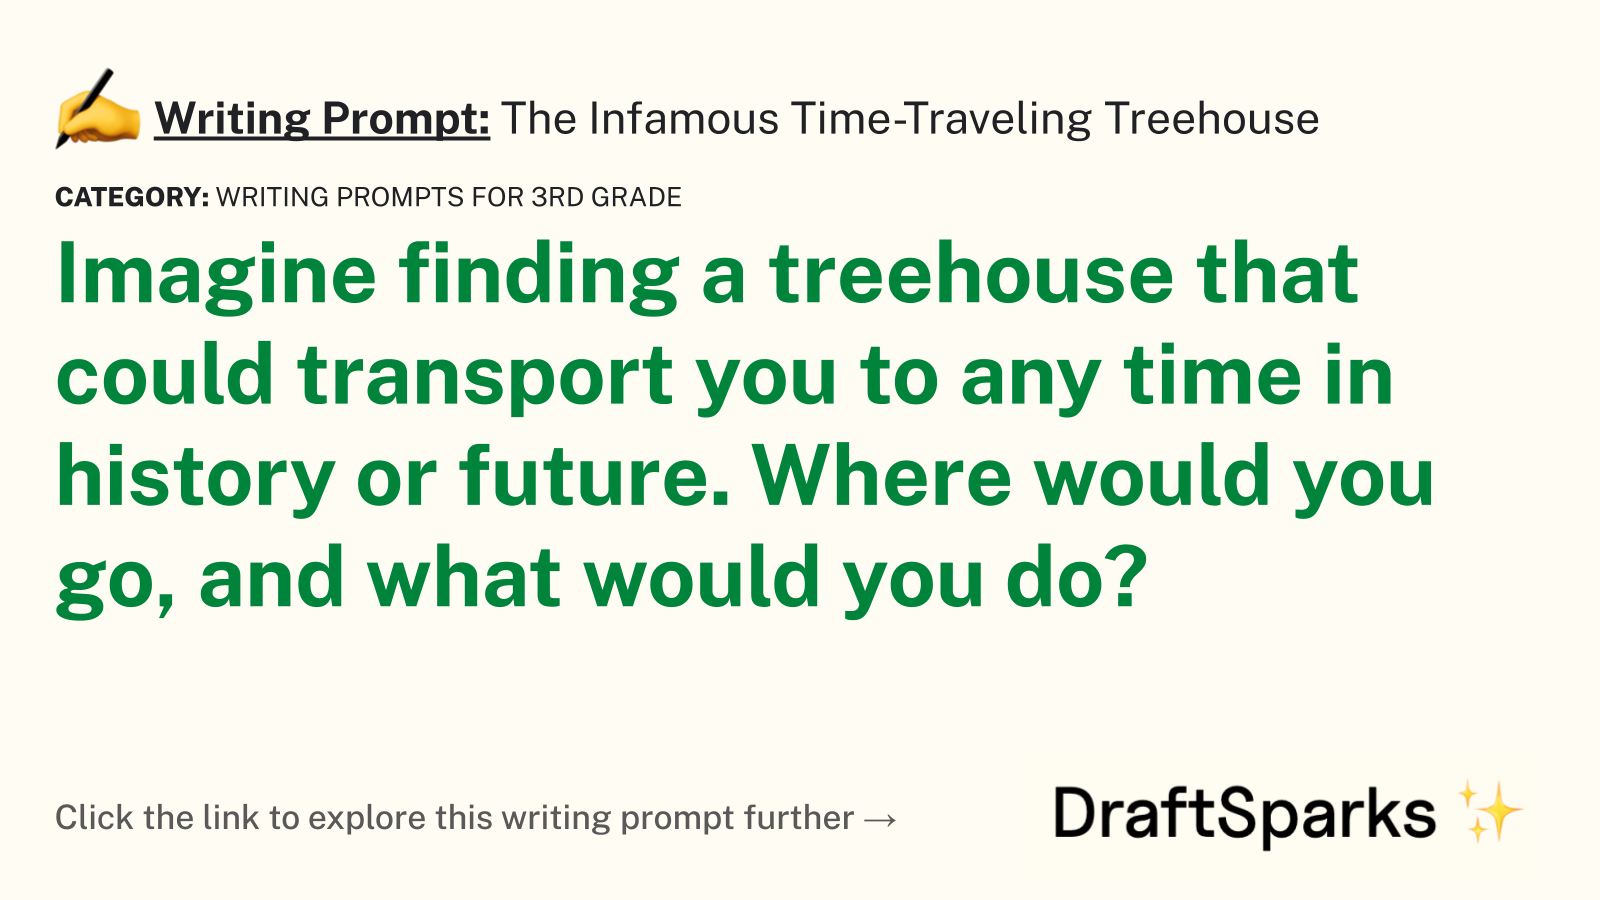 The Infamous Time-Traveling Treehouse